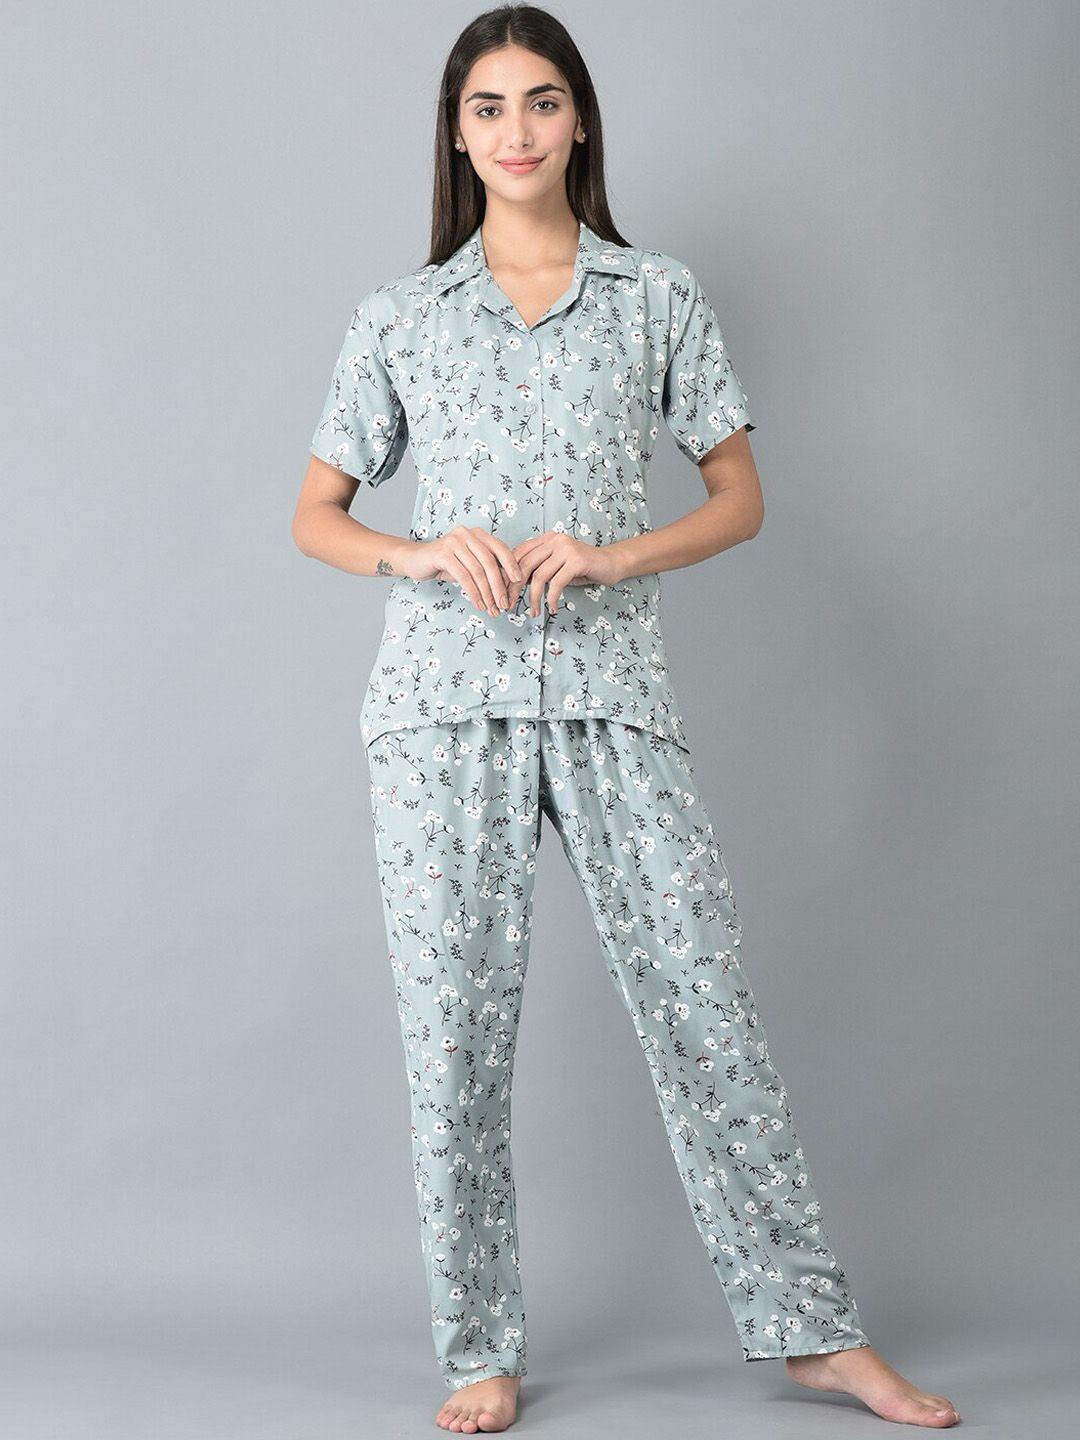 noty floral printed night suit